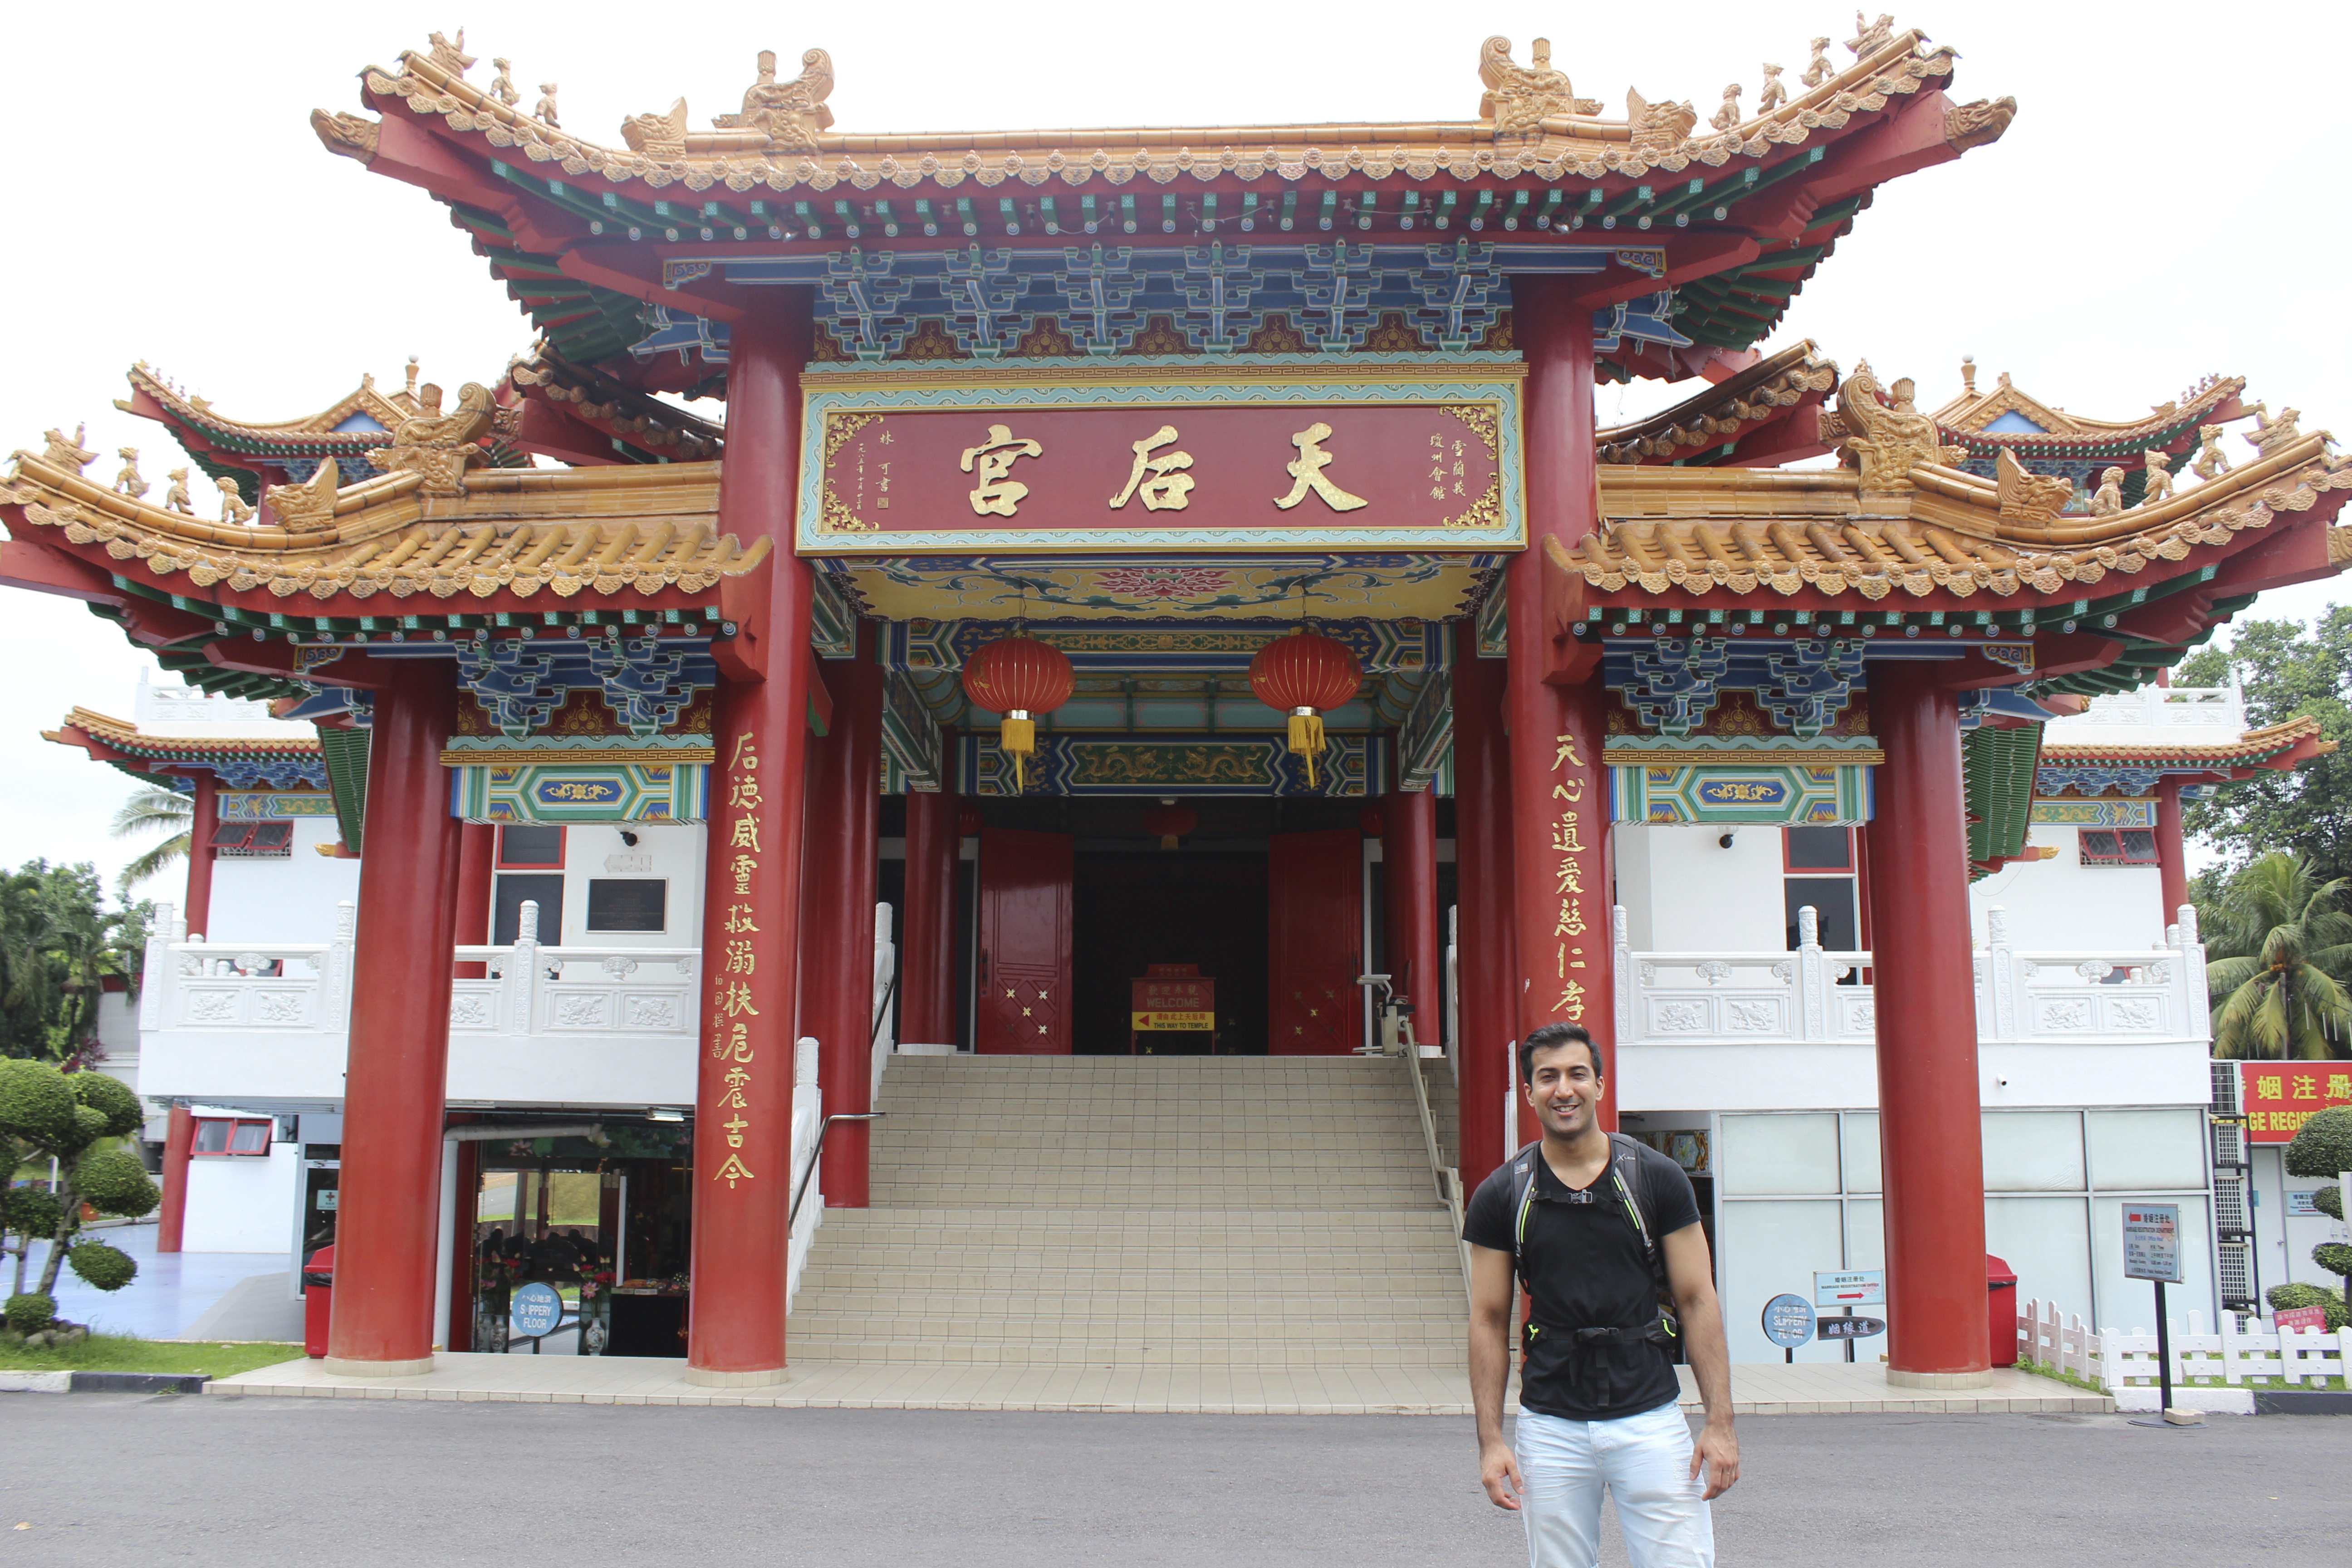 Zach in front of Thean Hou temple entrance